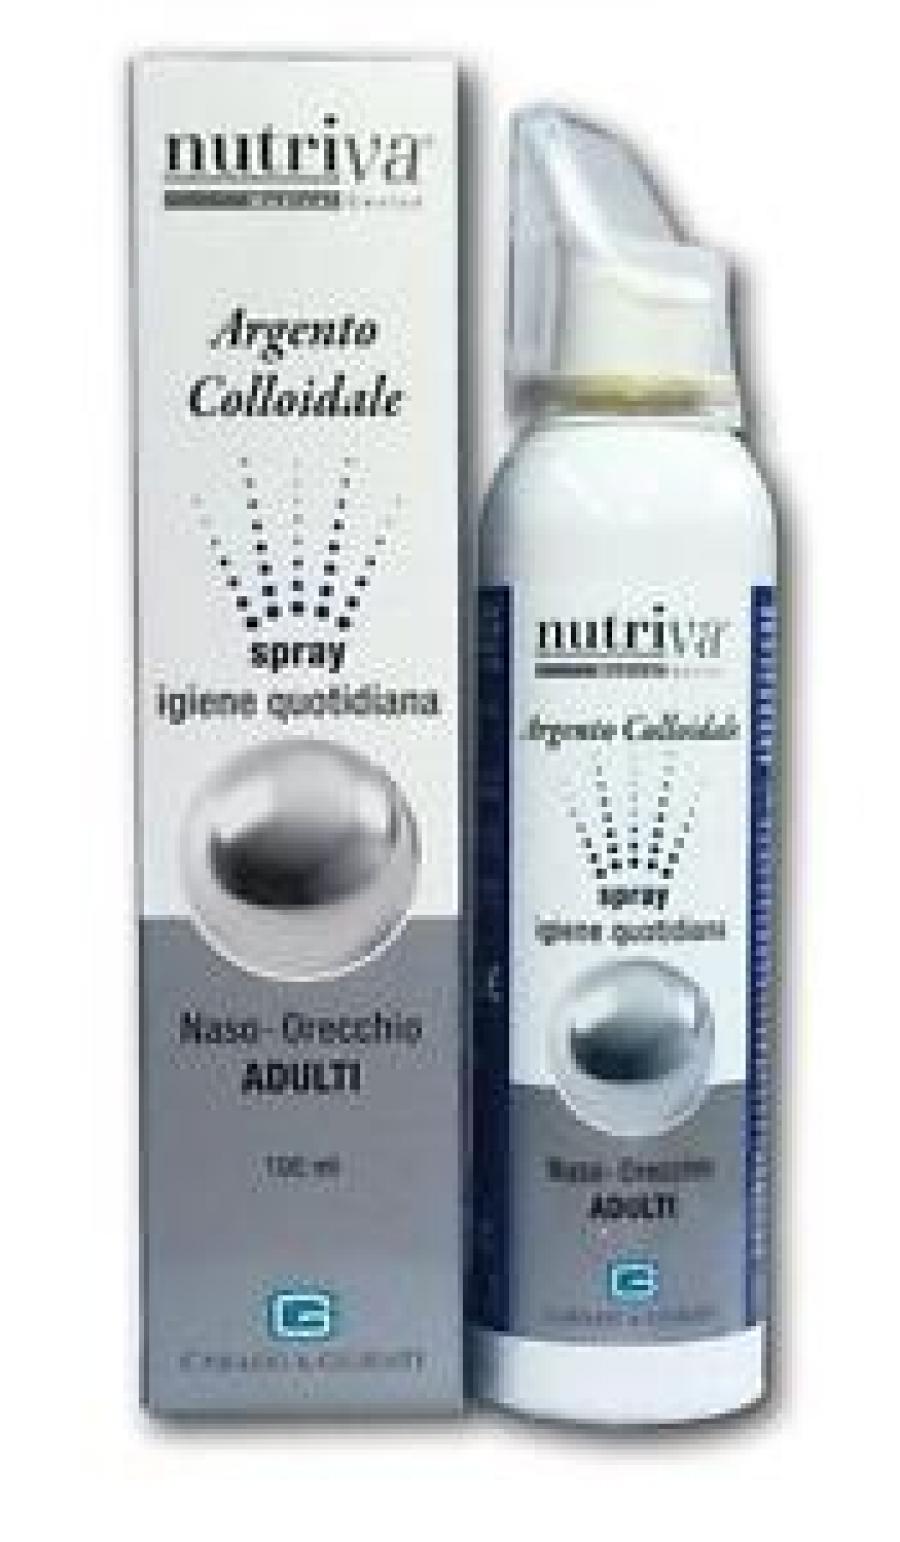 Nutriva argento colloidale spray adulti argento purissimo a 20 ppm